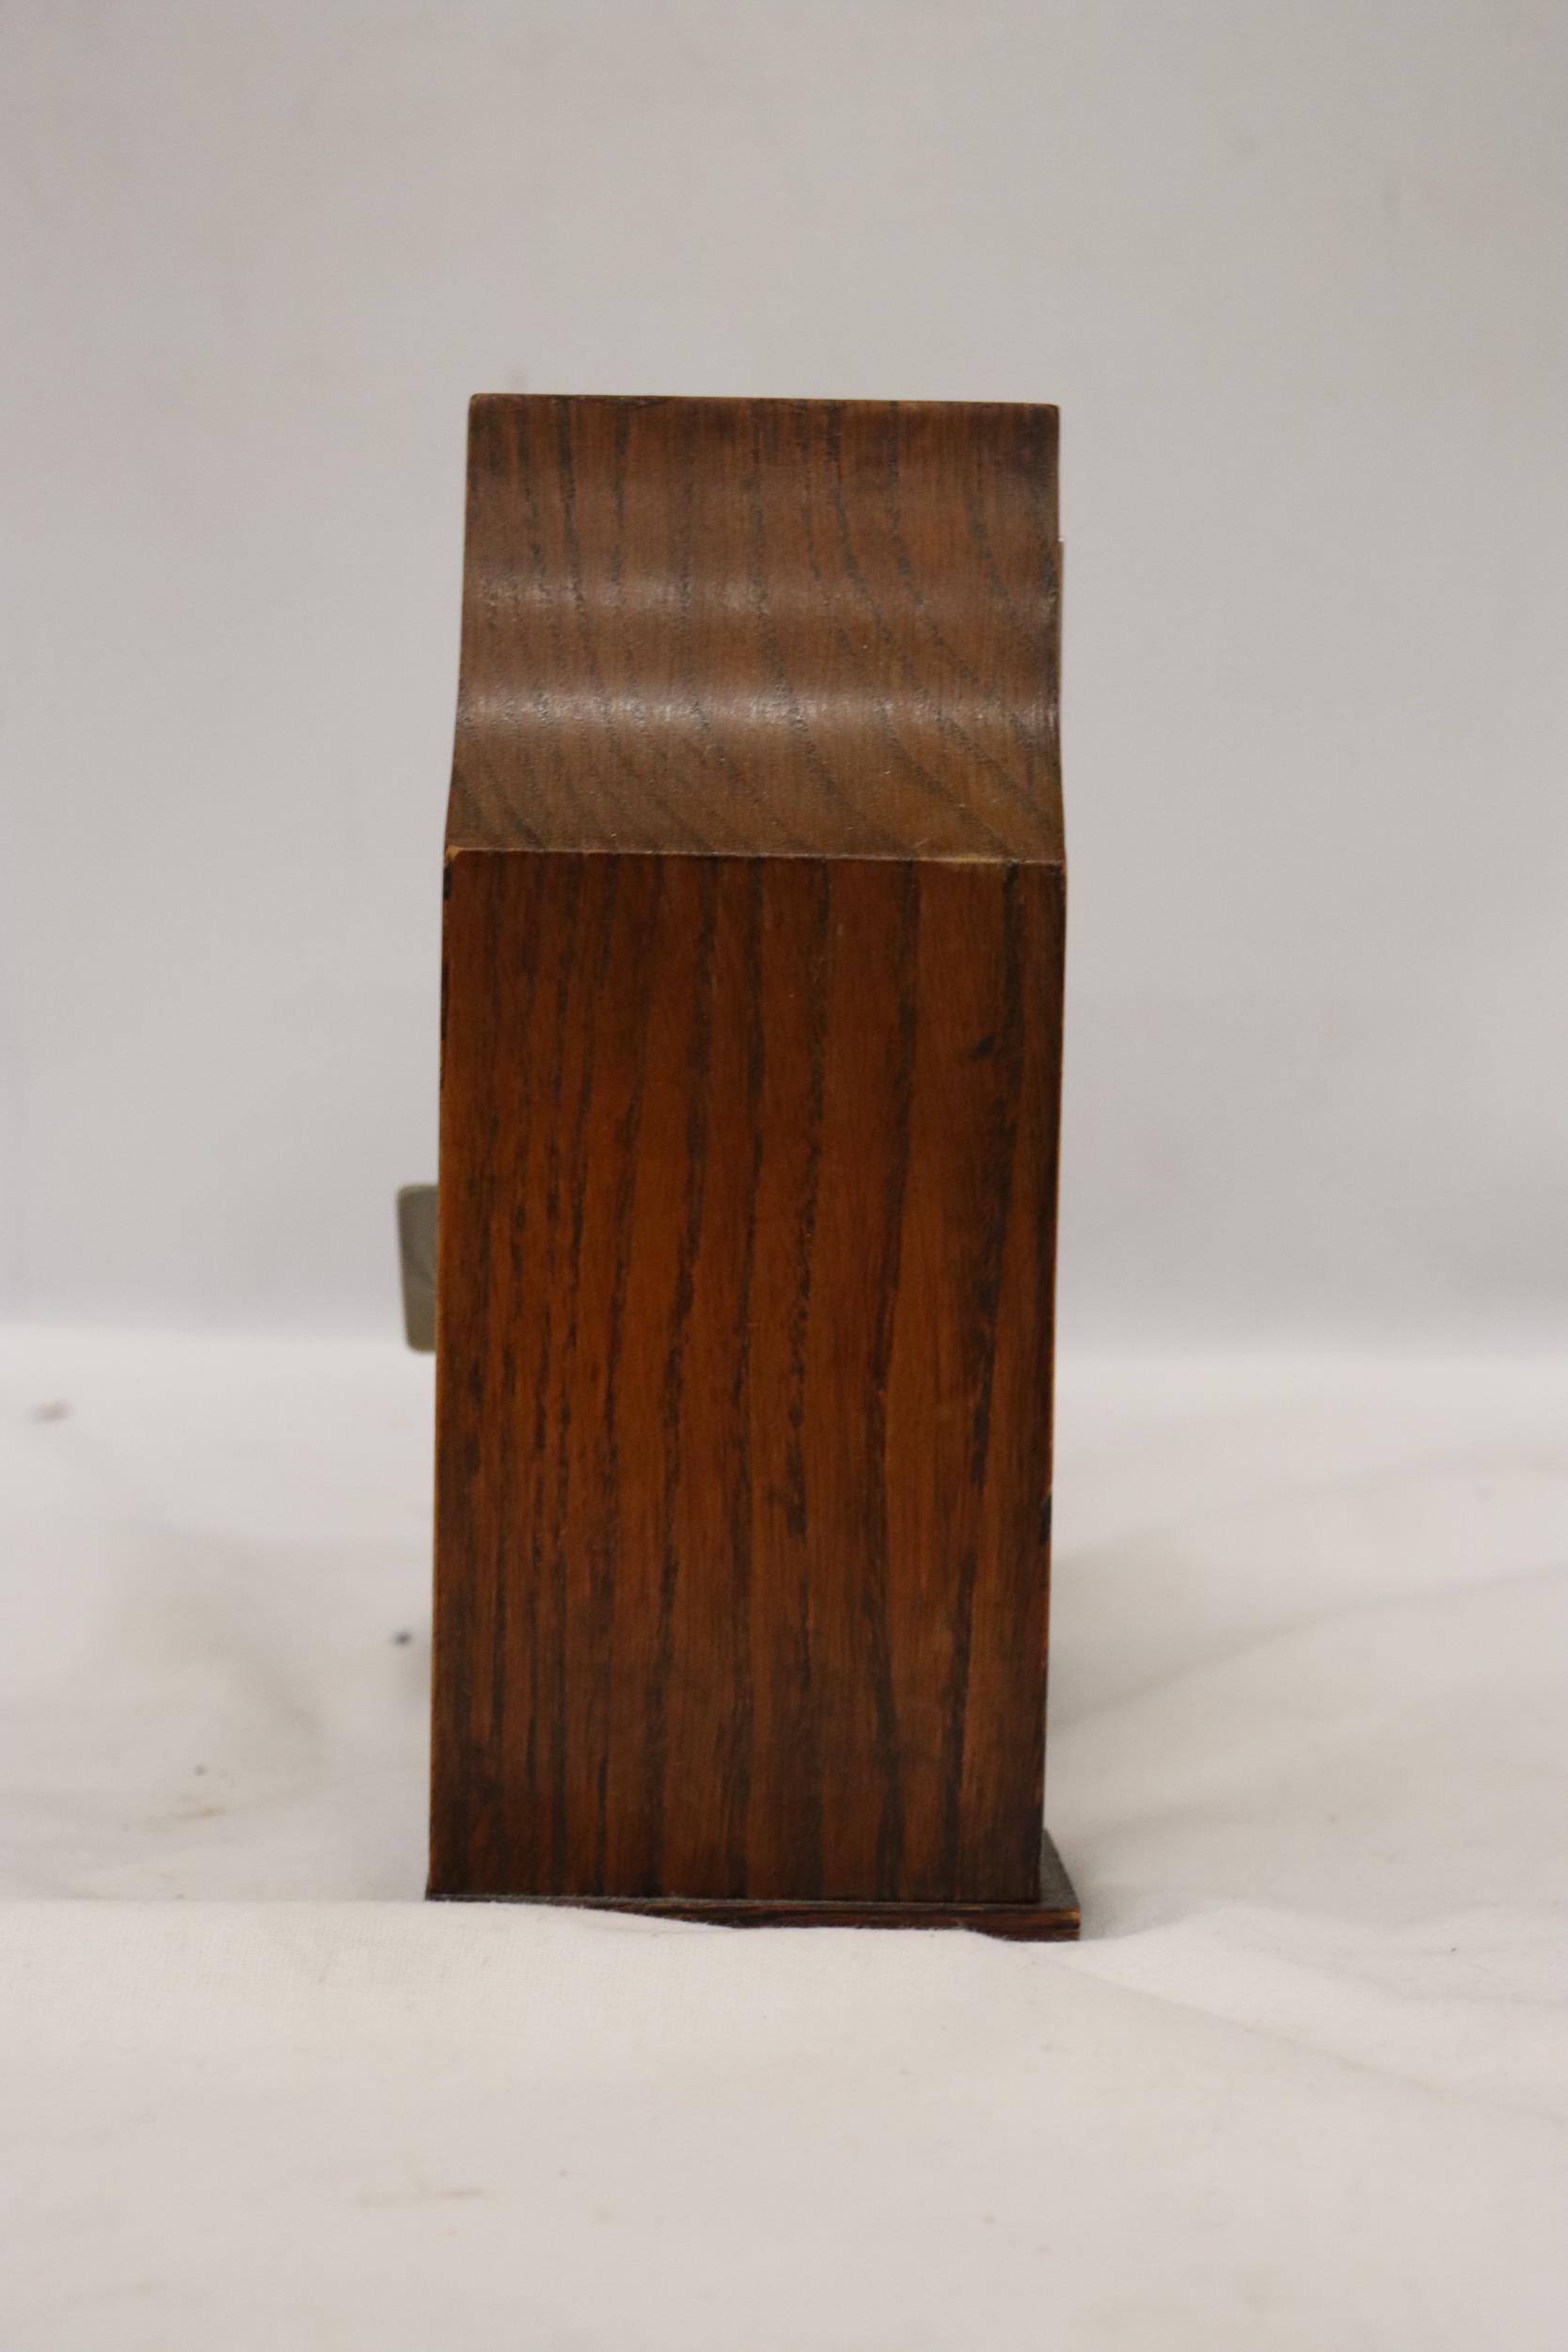 A DECO STYLE OAK 8 DAY MANTLE CLOCK WITH WIND UP MECHANISM SEEN WORKING BUT NO WARRANTY - Image 2 of 6